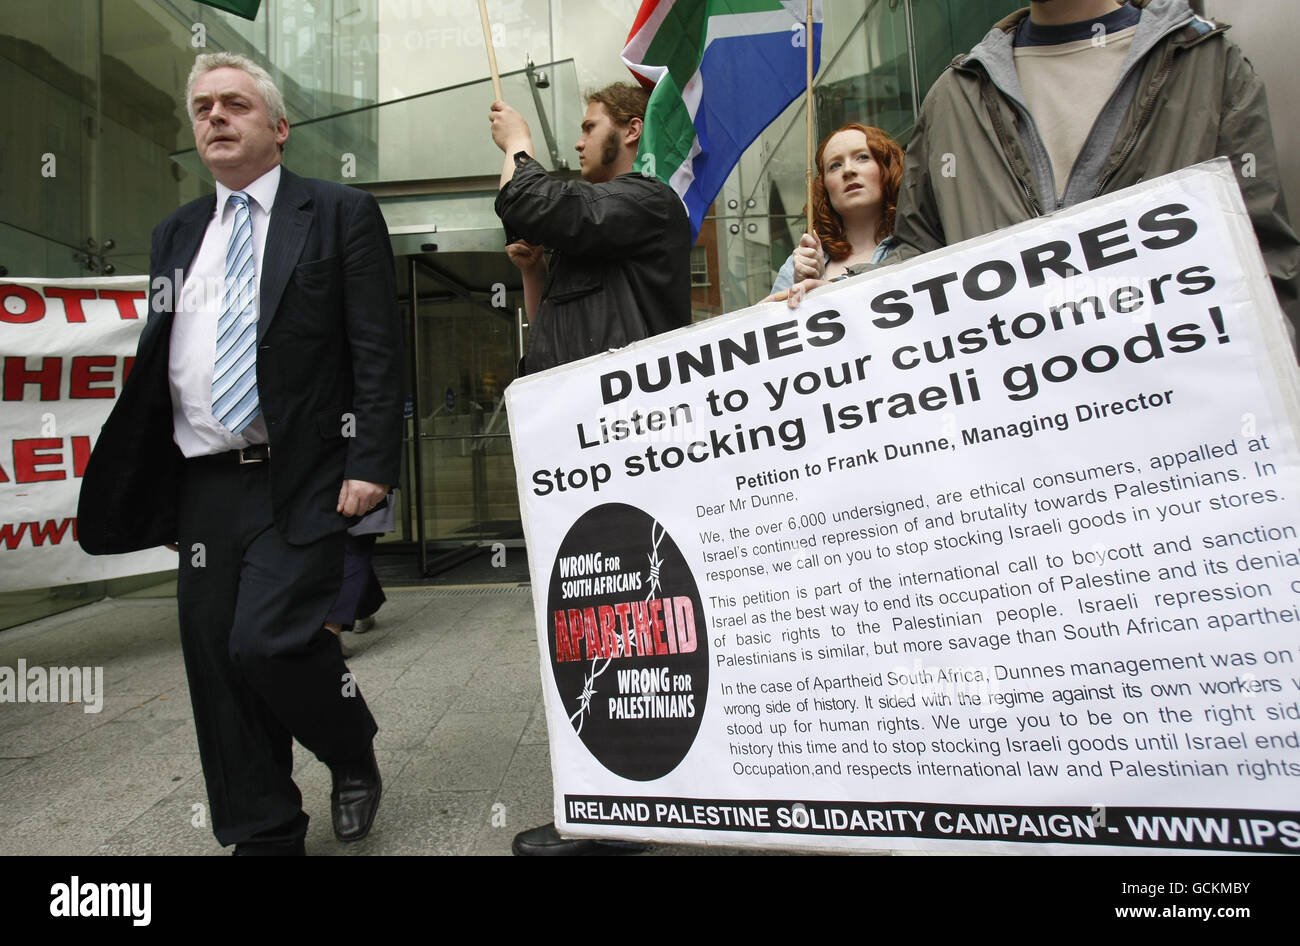 Ireland Palestine Solidarity Campaign (IPSC) deliver a petition to Dunnes Stores signed by 6,000 shoppers demanding a boycott of Israeli products at Dunnes Stores head office in Dublin this morning. Stock Photo